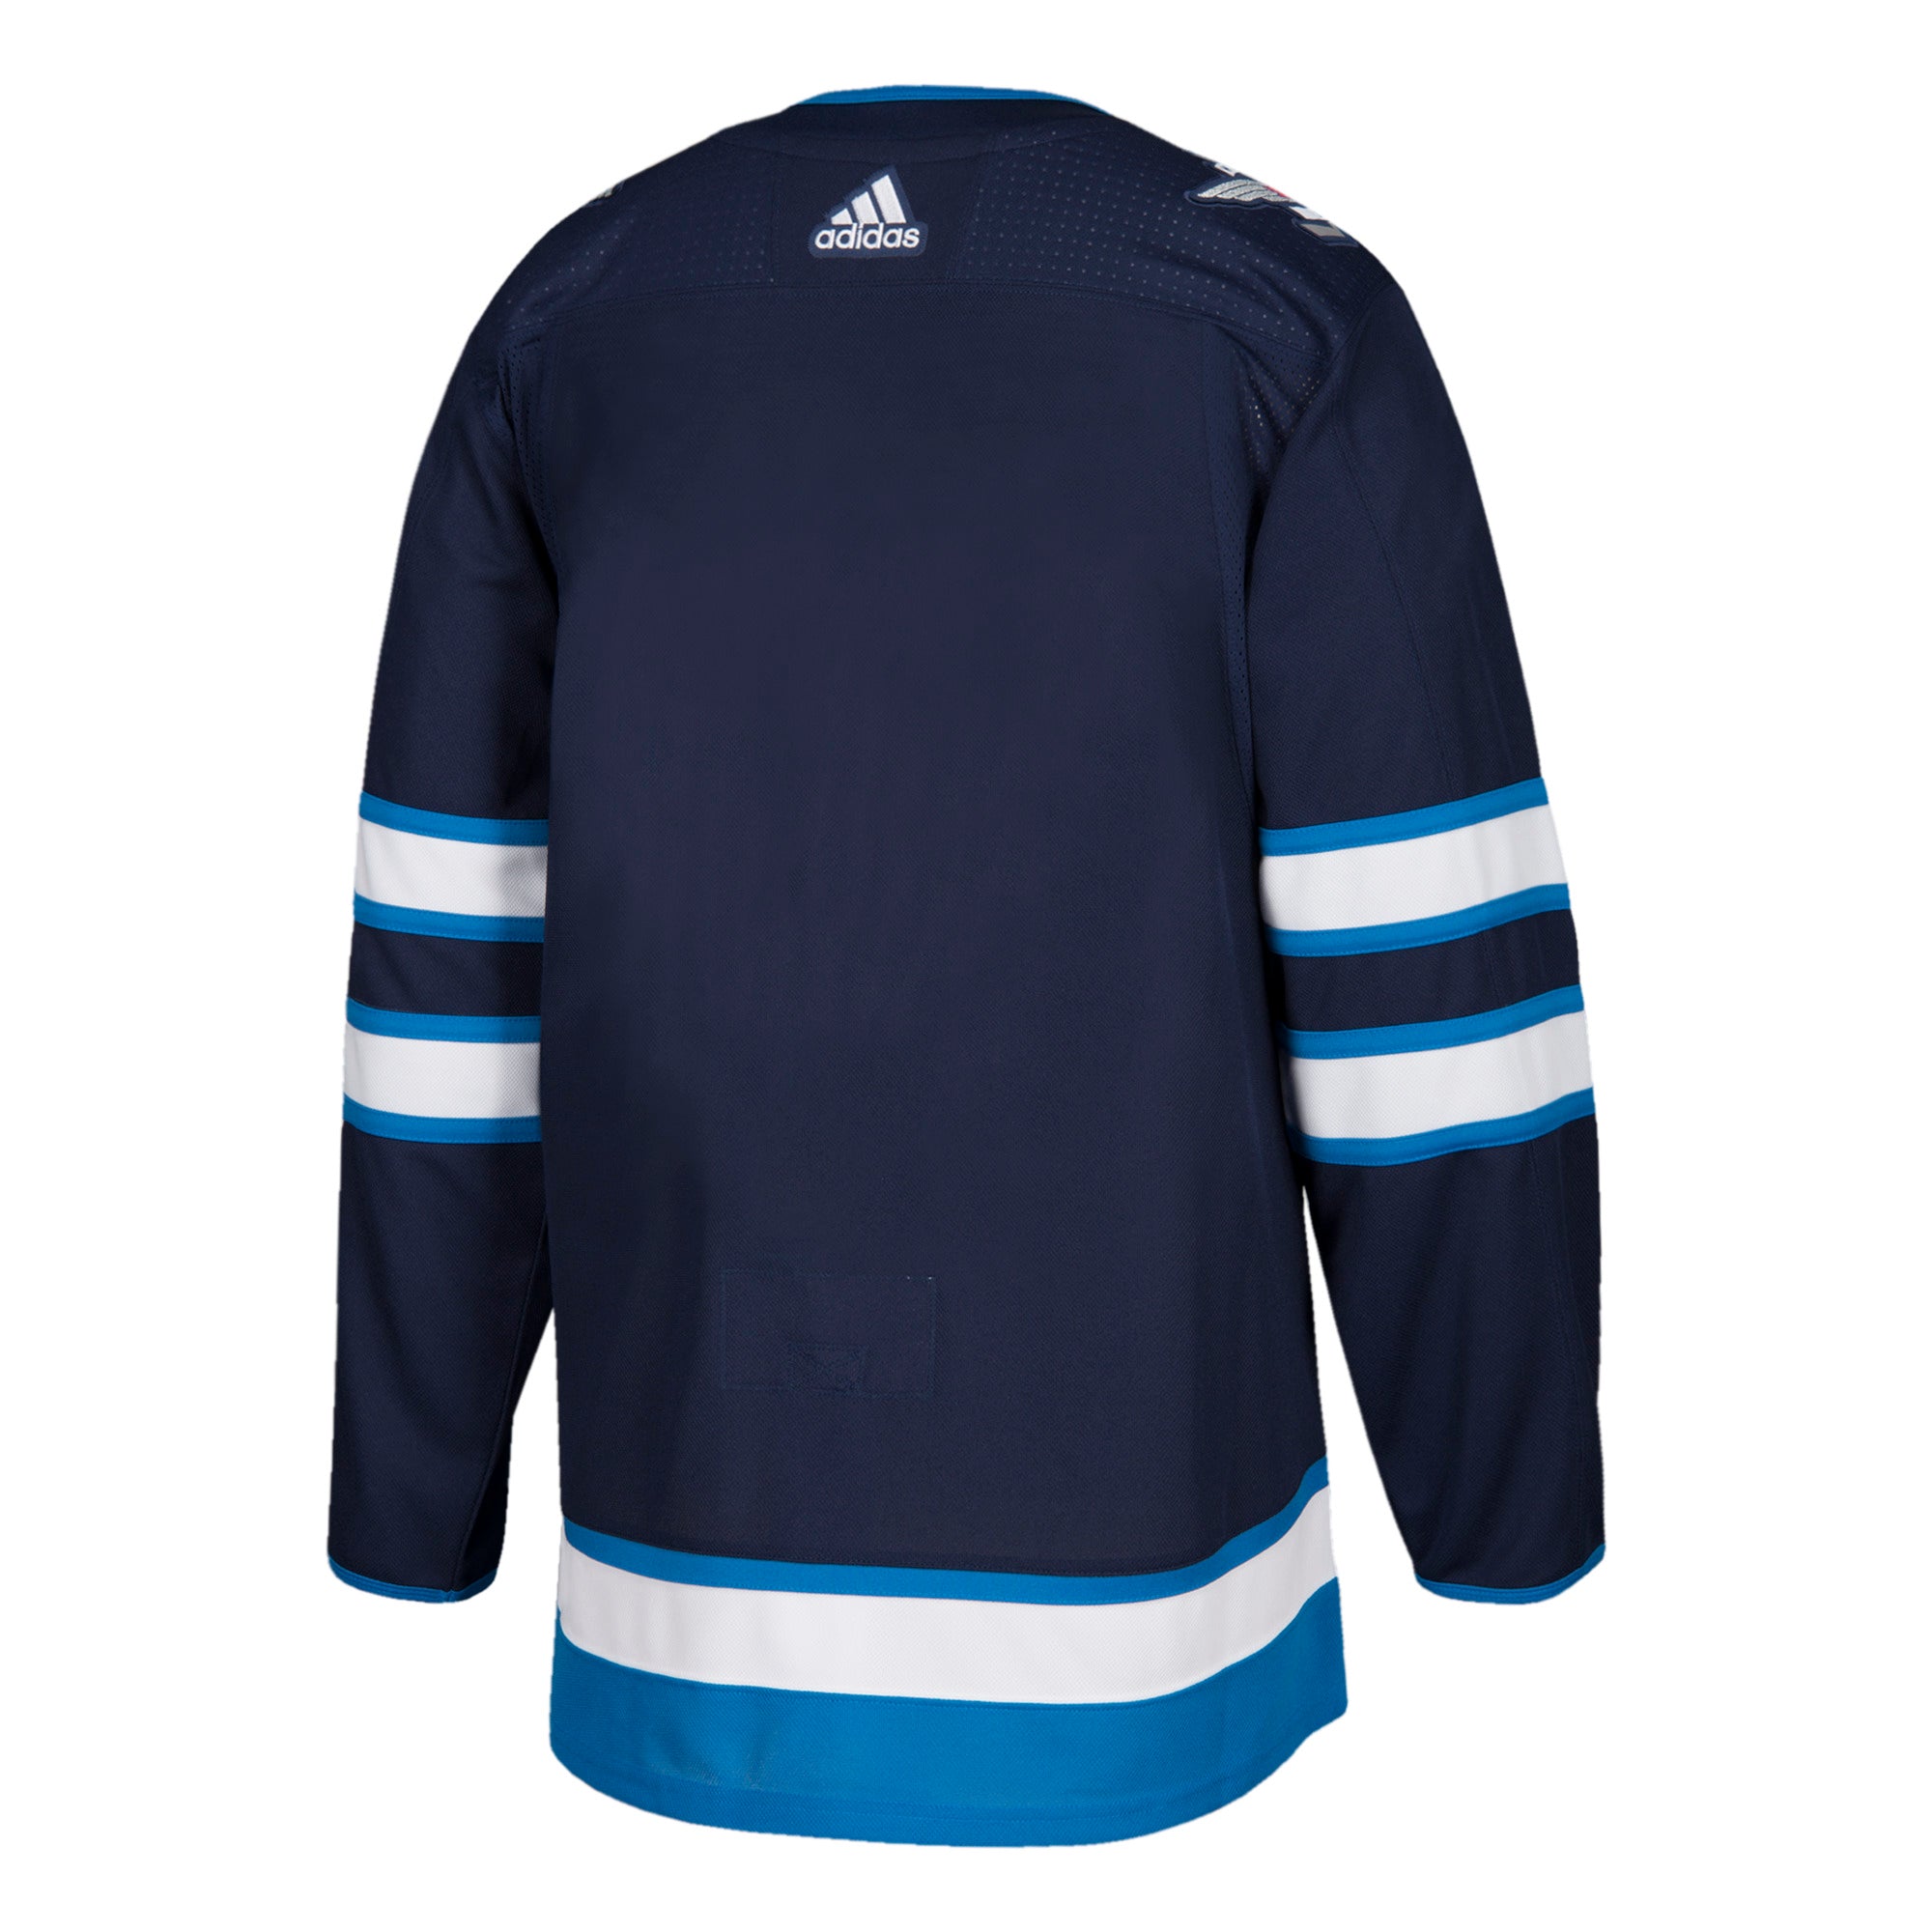 Hockey Jersey Outlet - 100% Licensed Authentic Hockey Jerseys